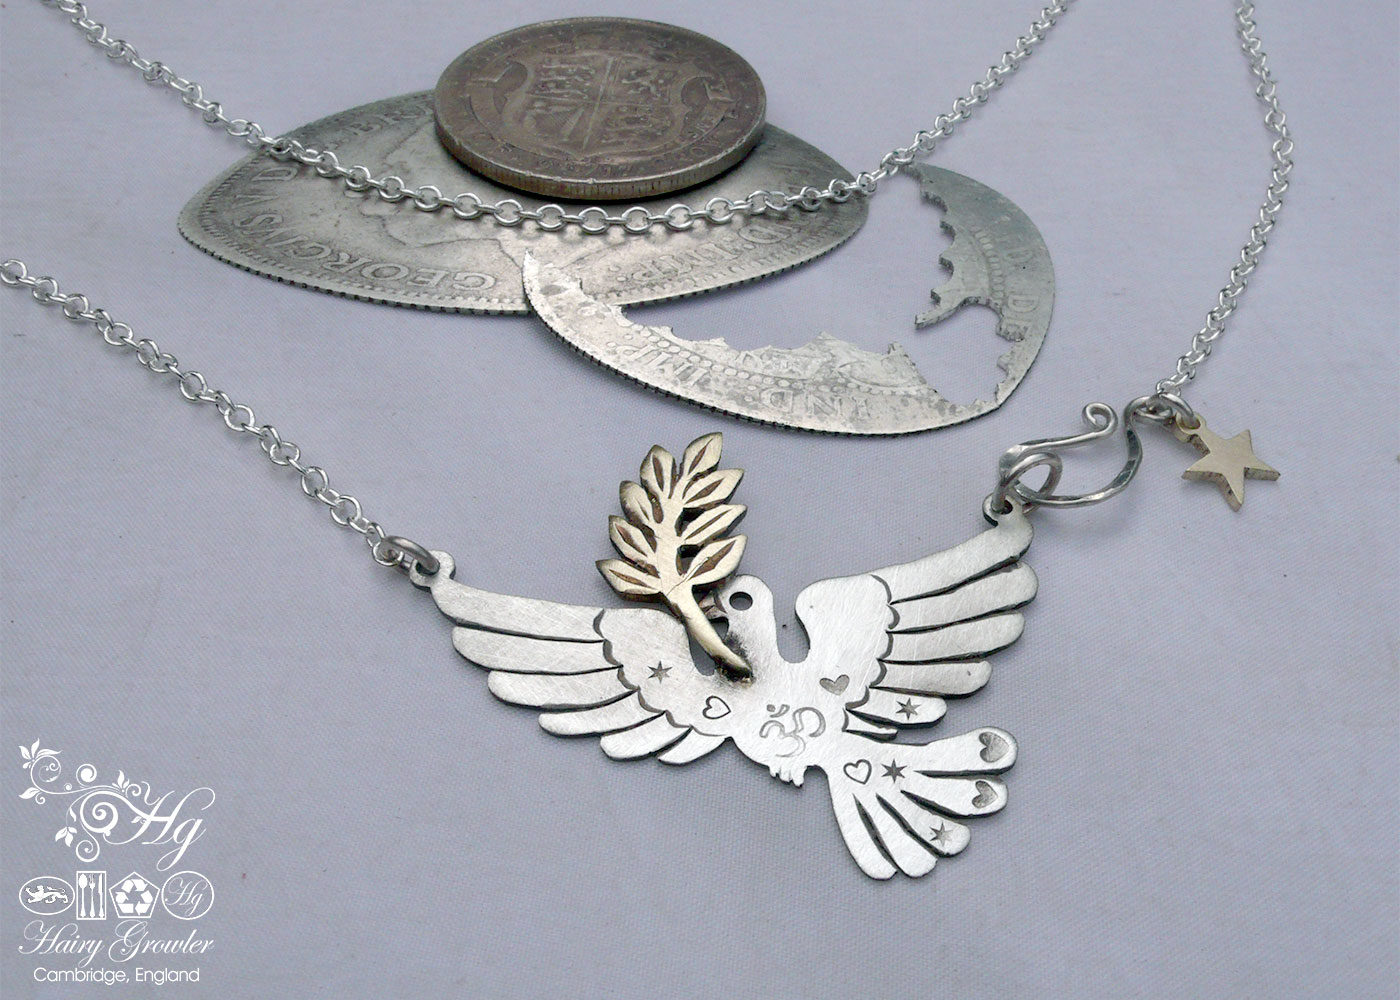 Handcrafted and recycled sterling silver beautiful peace and love doves necklace.